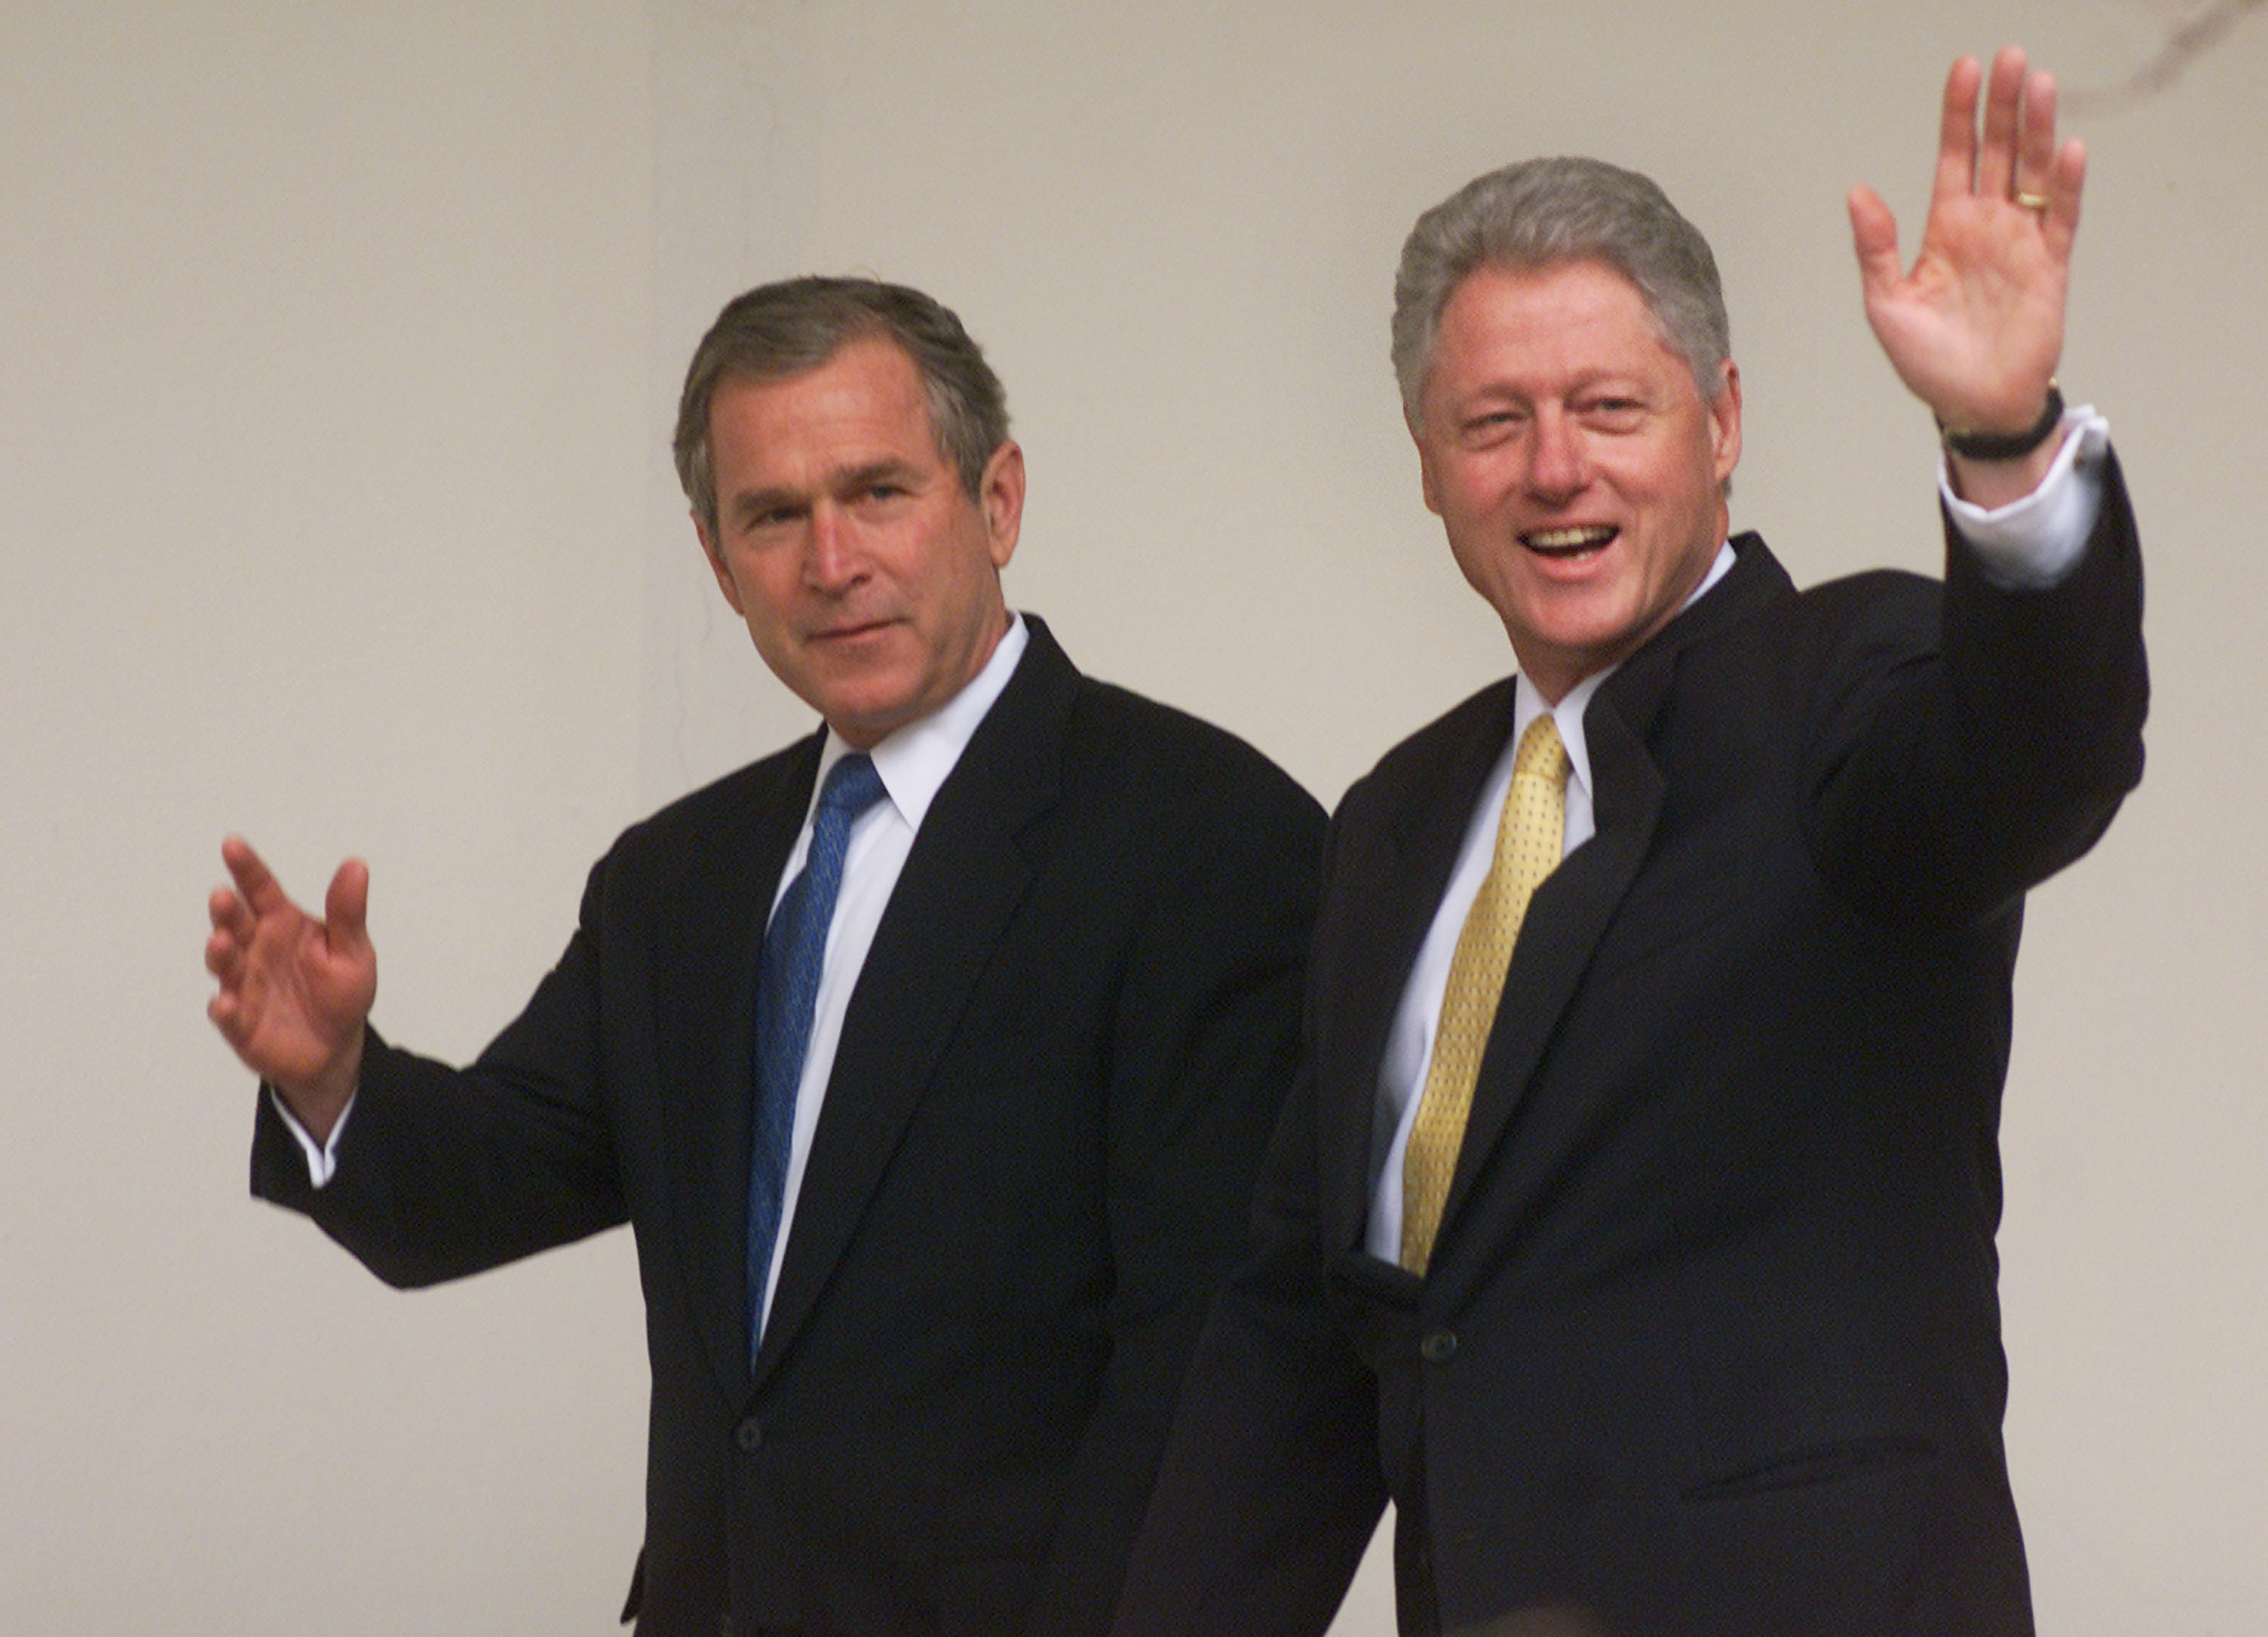 Clinton Welcomes Bush To The White House